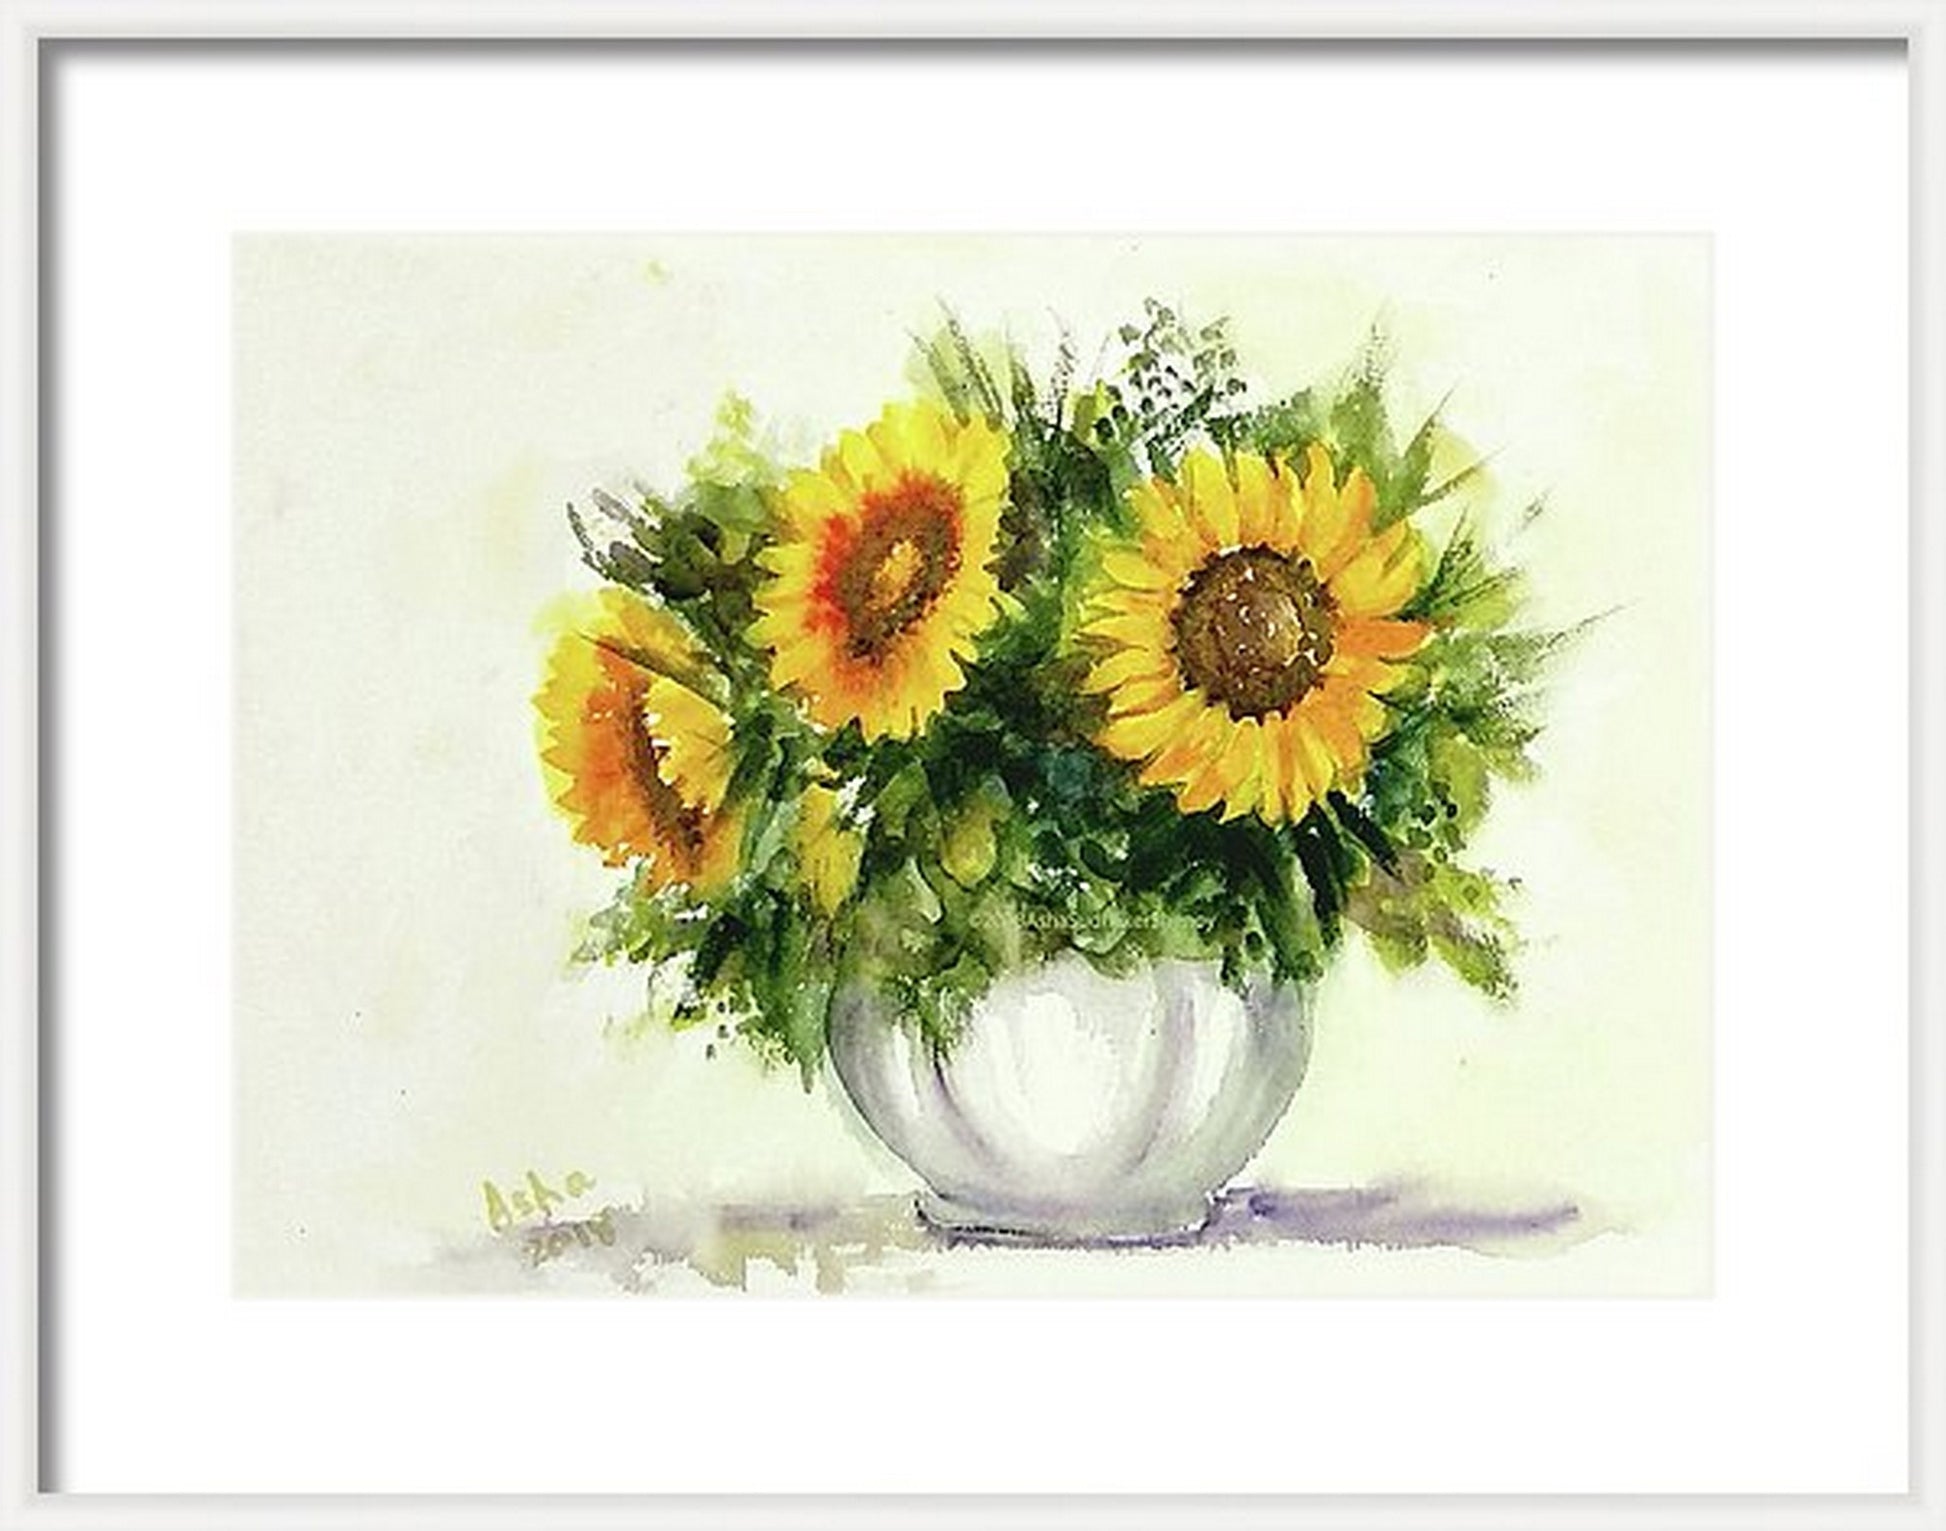 Virtual frame view Vase of Summer sunflowers, Living room floral decor